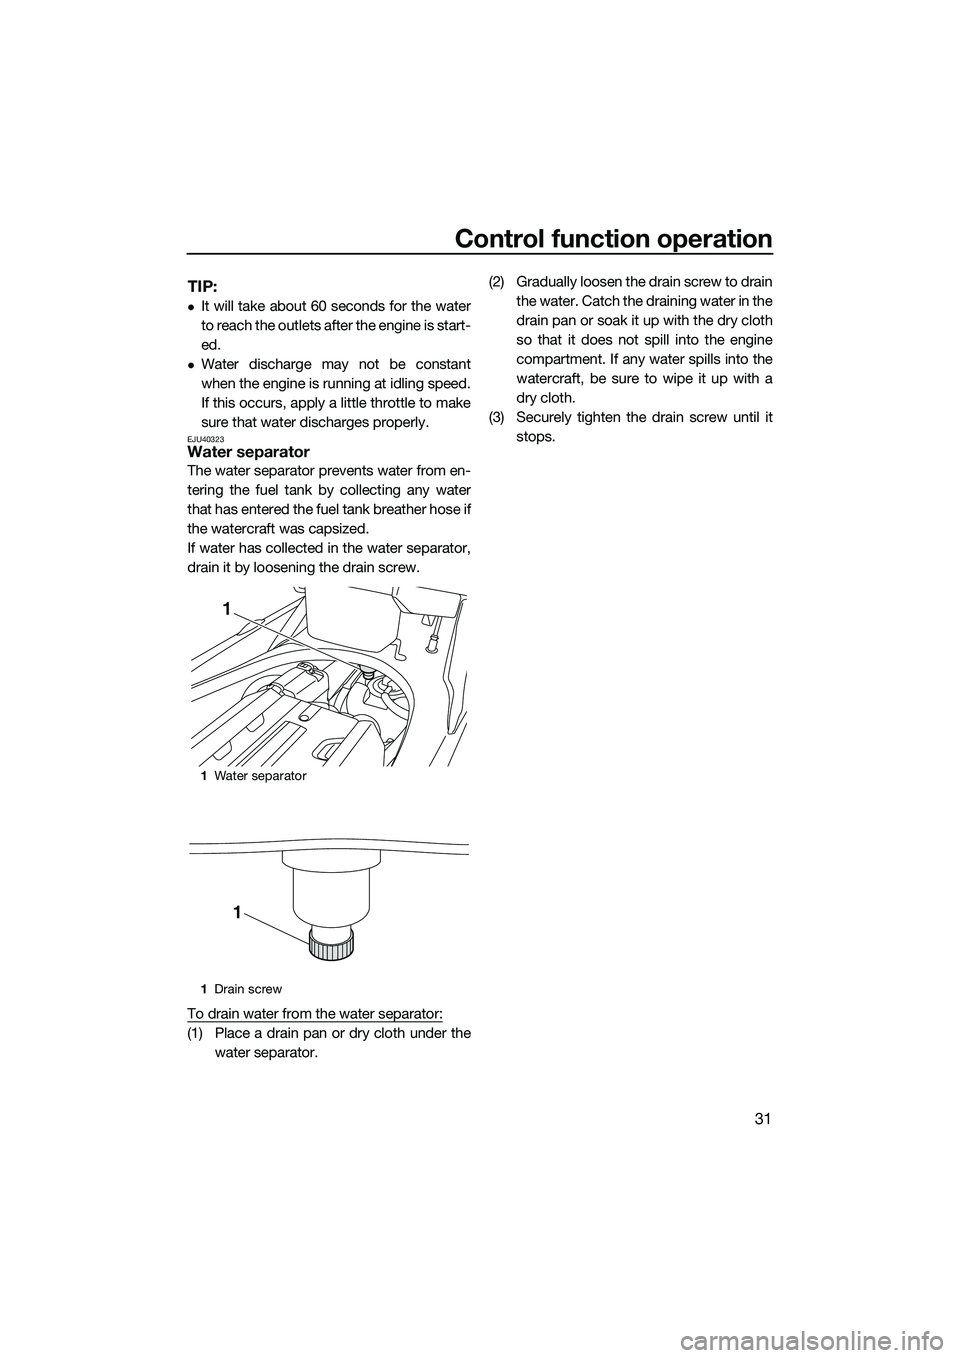 YAMAHA FX SVHO 2014  Owners Manual Control function operation
31
TIP:
It will take about 60 seconds for the water
to reach the outlets after the engine is start-
ed.
Water discharge may not be constant
when the engine is running 